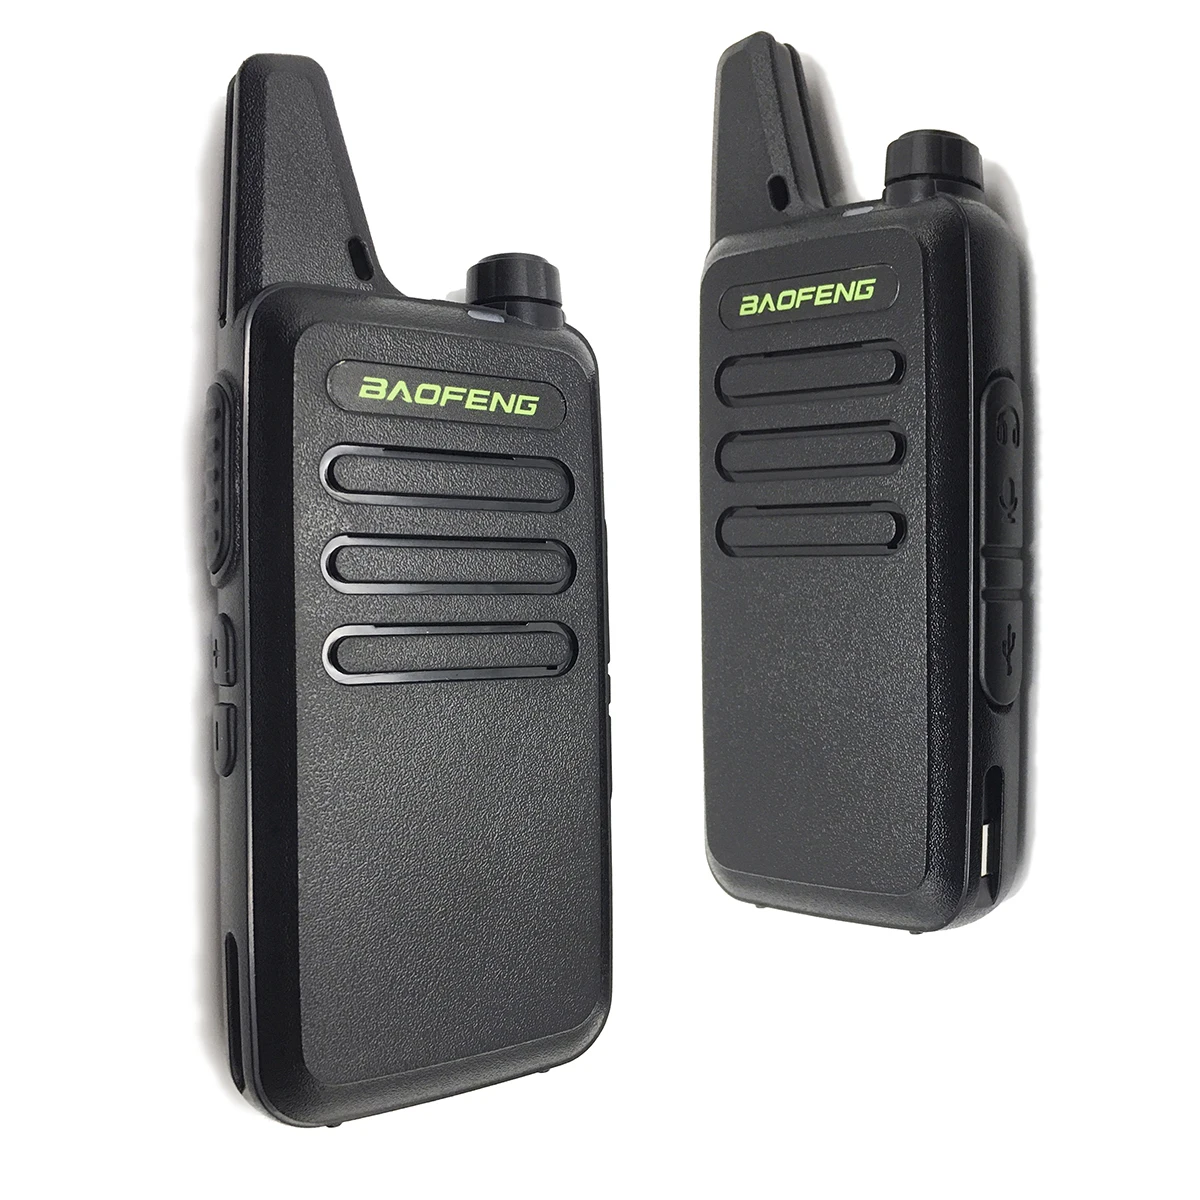 

Baofeng 2 pcs Mini Walkie Talkie PMR 446 FRS Portable Two-way Radio ht PTT Walkie-talkies T20 Portable Radios for Hunting Cafe